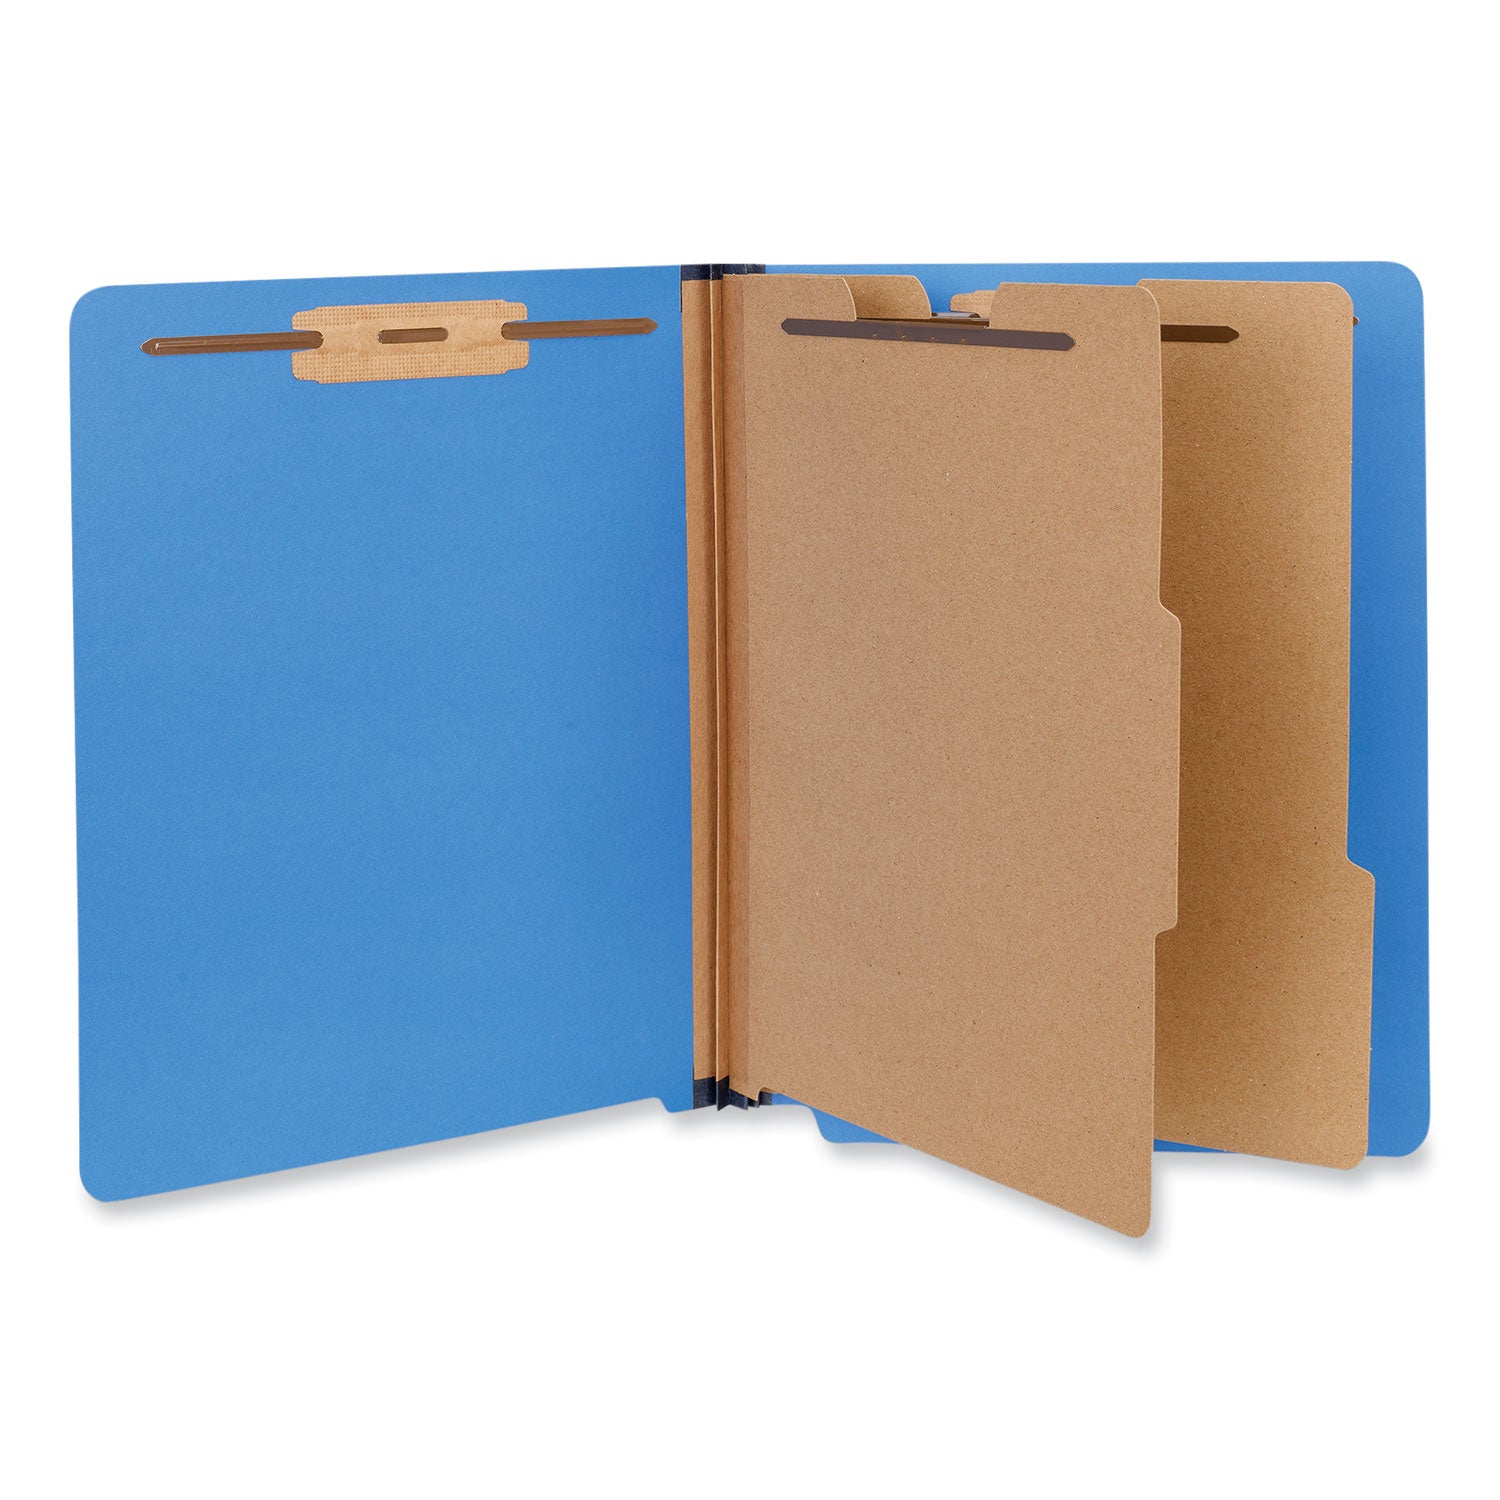 Deluxe Six-Section Pressboard End Tab Classification Folders, 2 Dividers, 6 Fasteners, Letter Size, Cobalt Blue, 10/Box - 